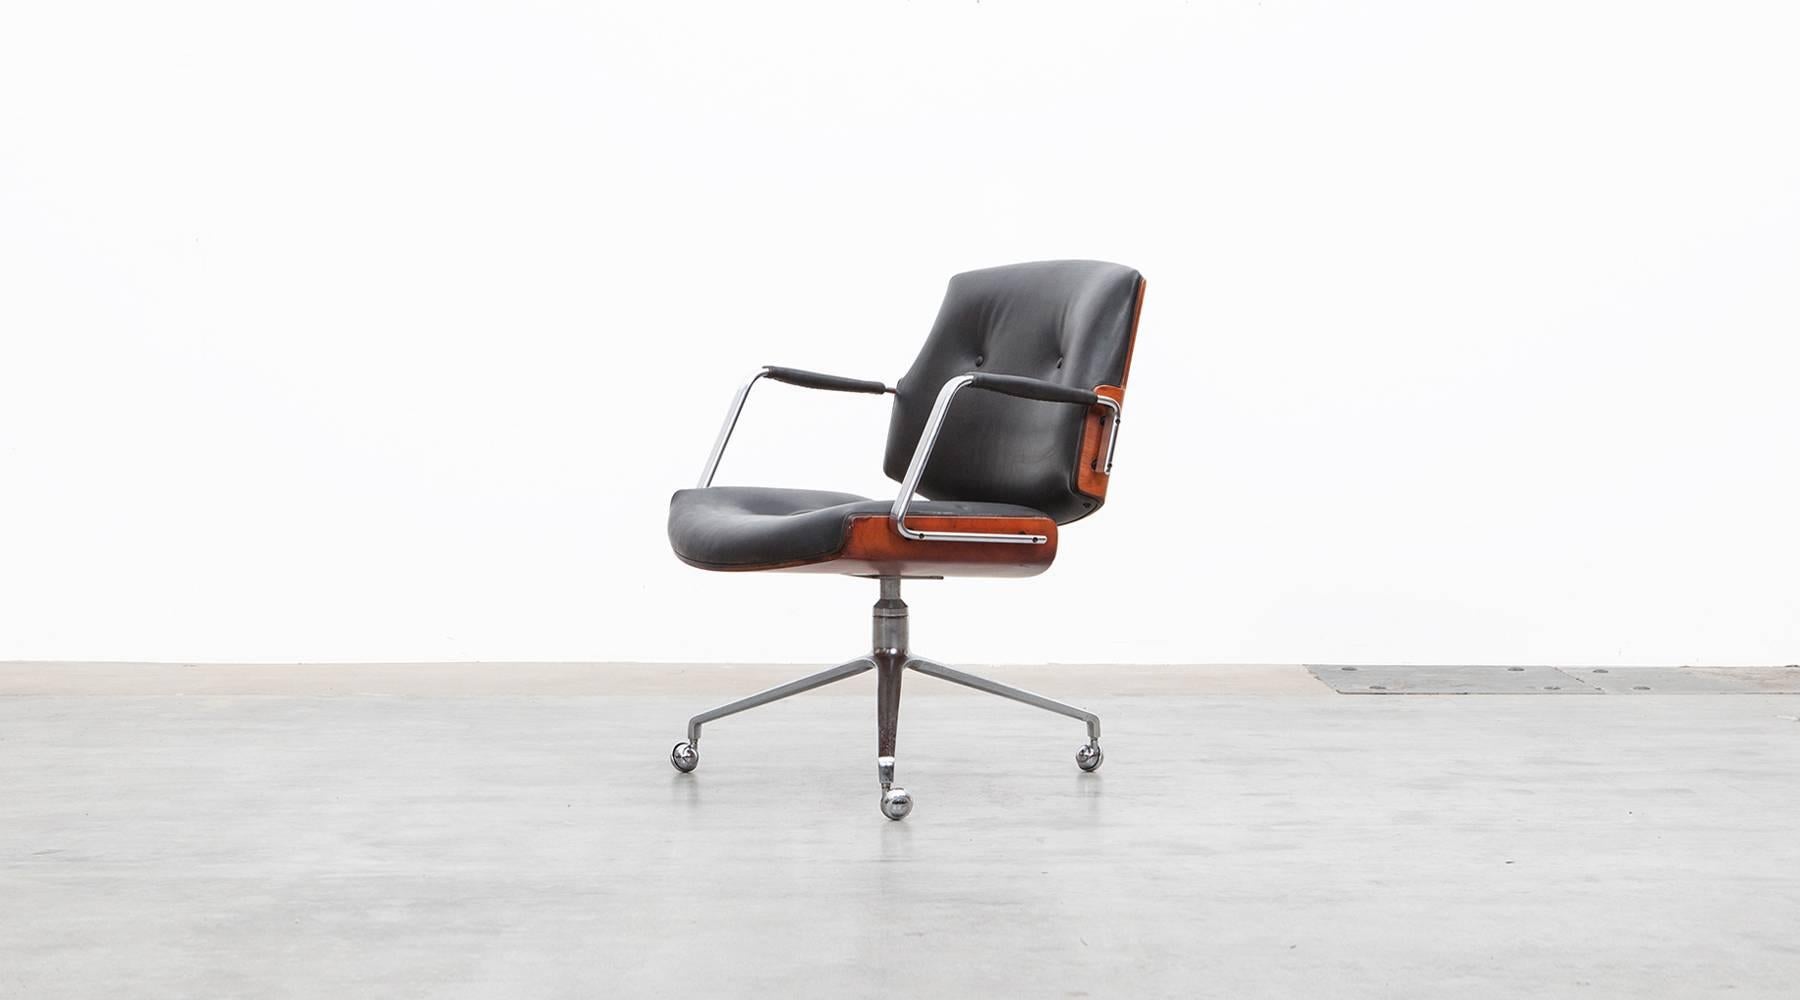 Black leather, wood, Swivel Chair by Fabricius and Kastholm, Germany, 1968.

Classical swivel chairs designed by Preben Fabricius and Jørgen Kastholm. The chair has a brushed steel tripod foot, high quality leather upholstery and two curved wooden